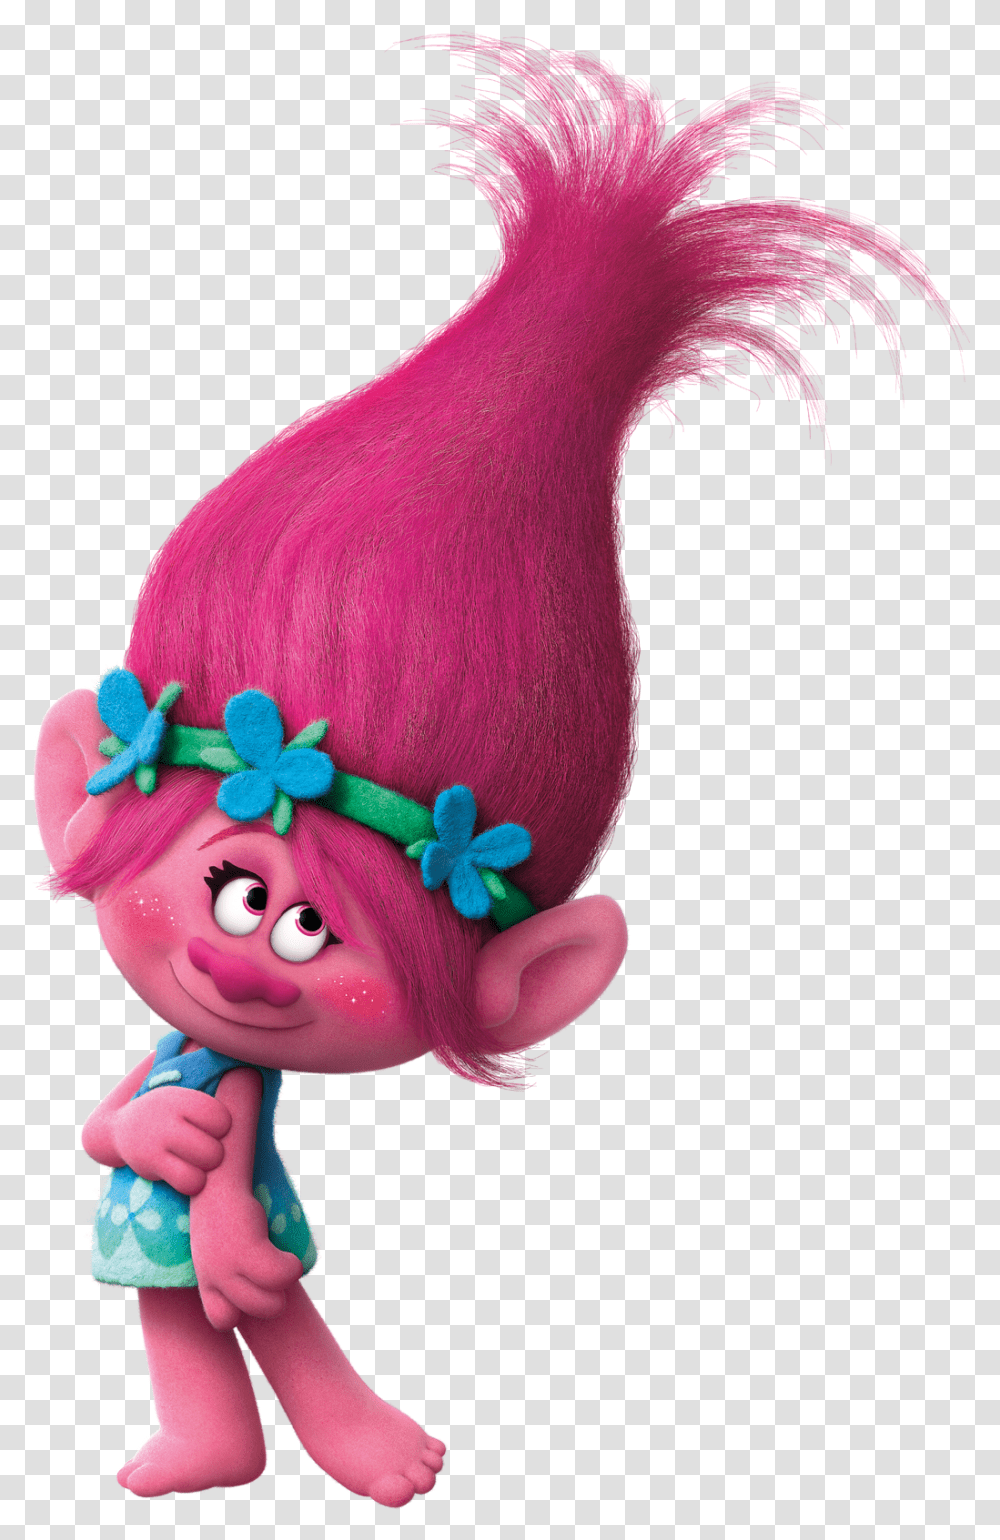 Poppy From Trolls, Toy, Apparel, Figurine Transparent Png